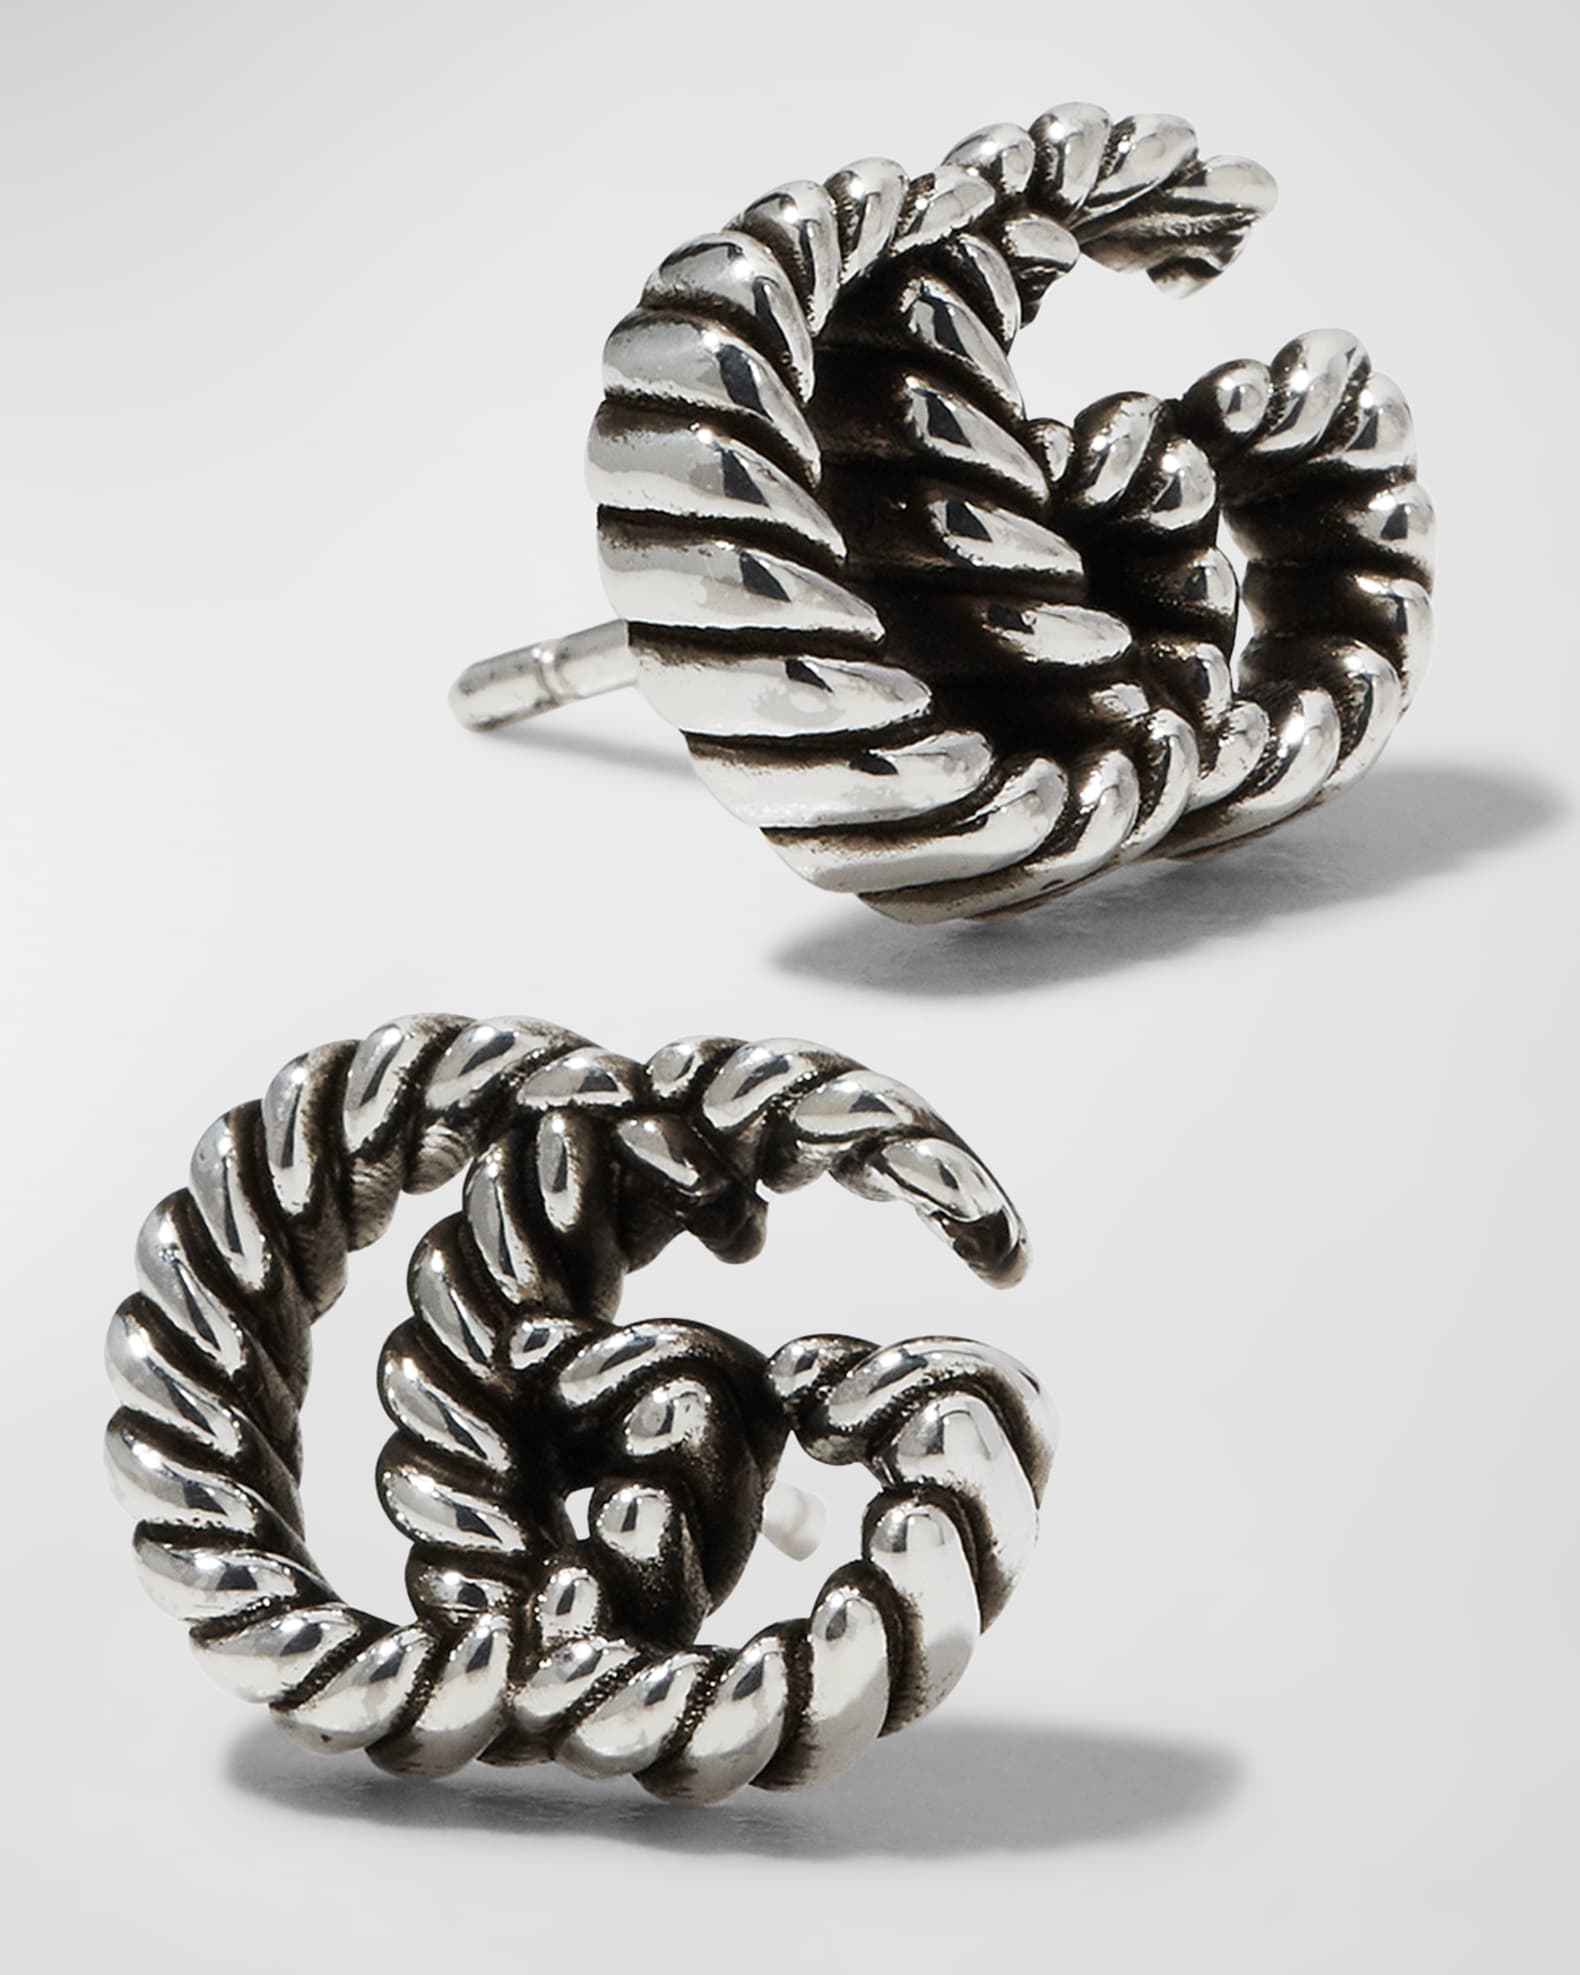 Gucci GG Marmont Stud Earrings in Aged Silver | Neiman Marcus